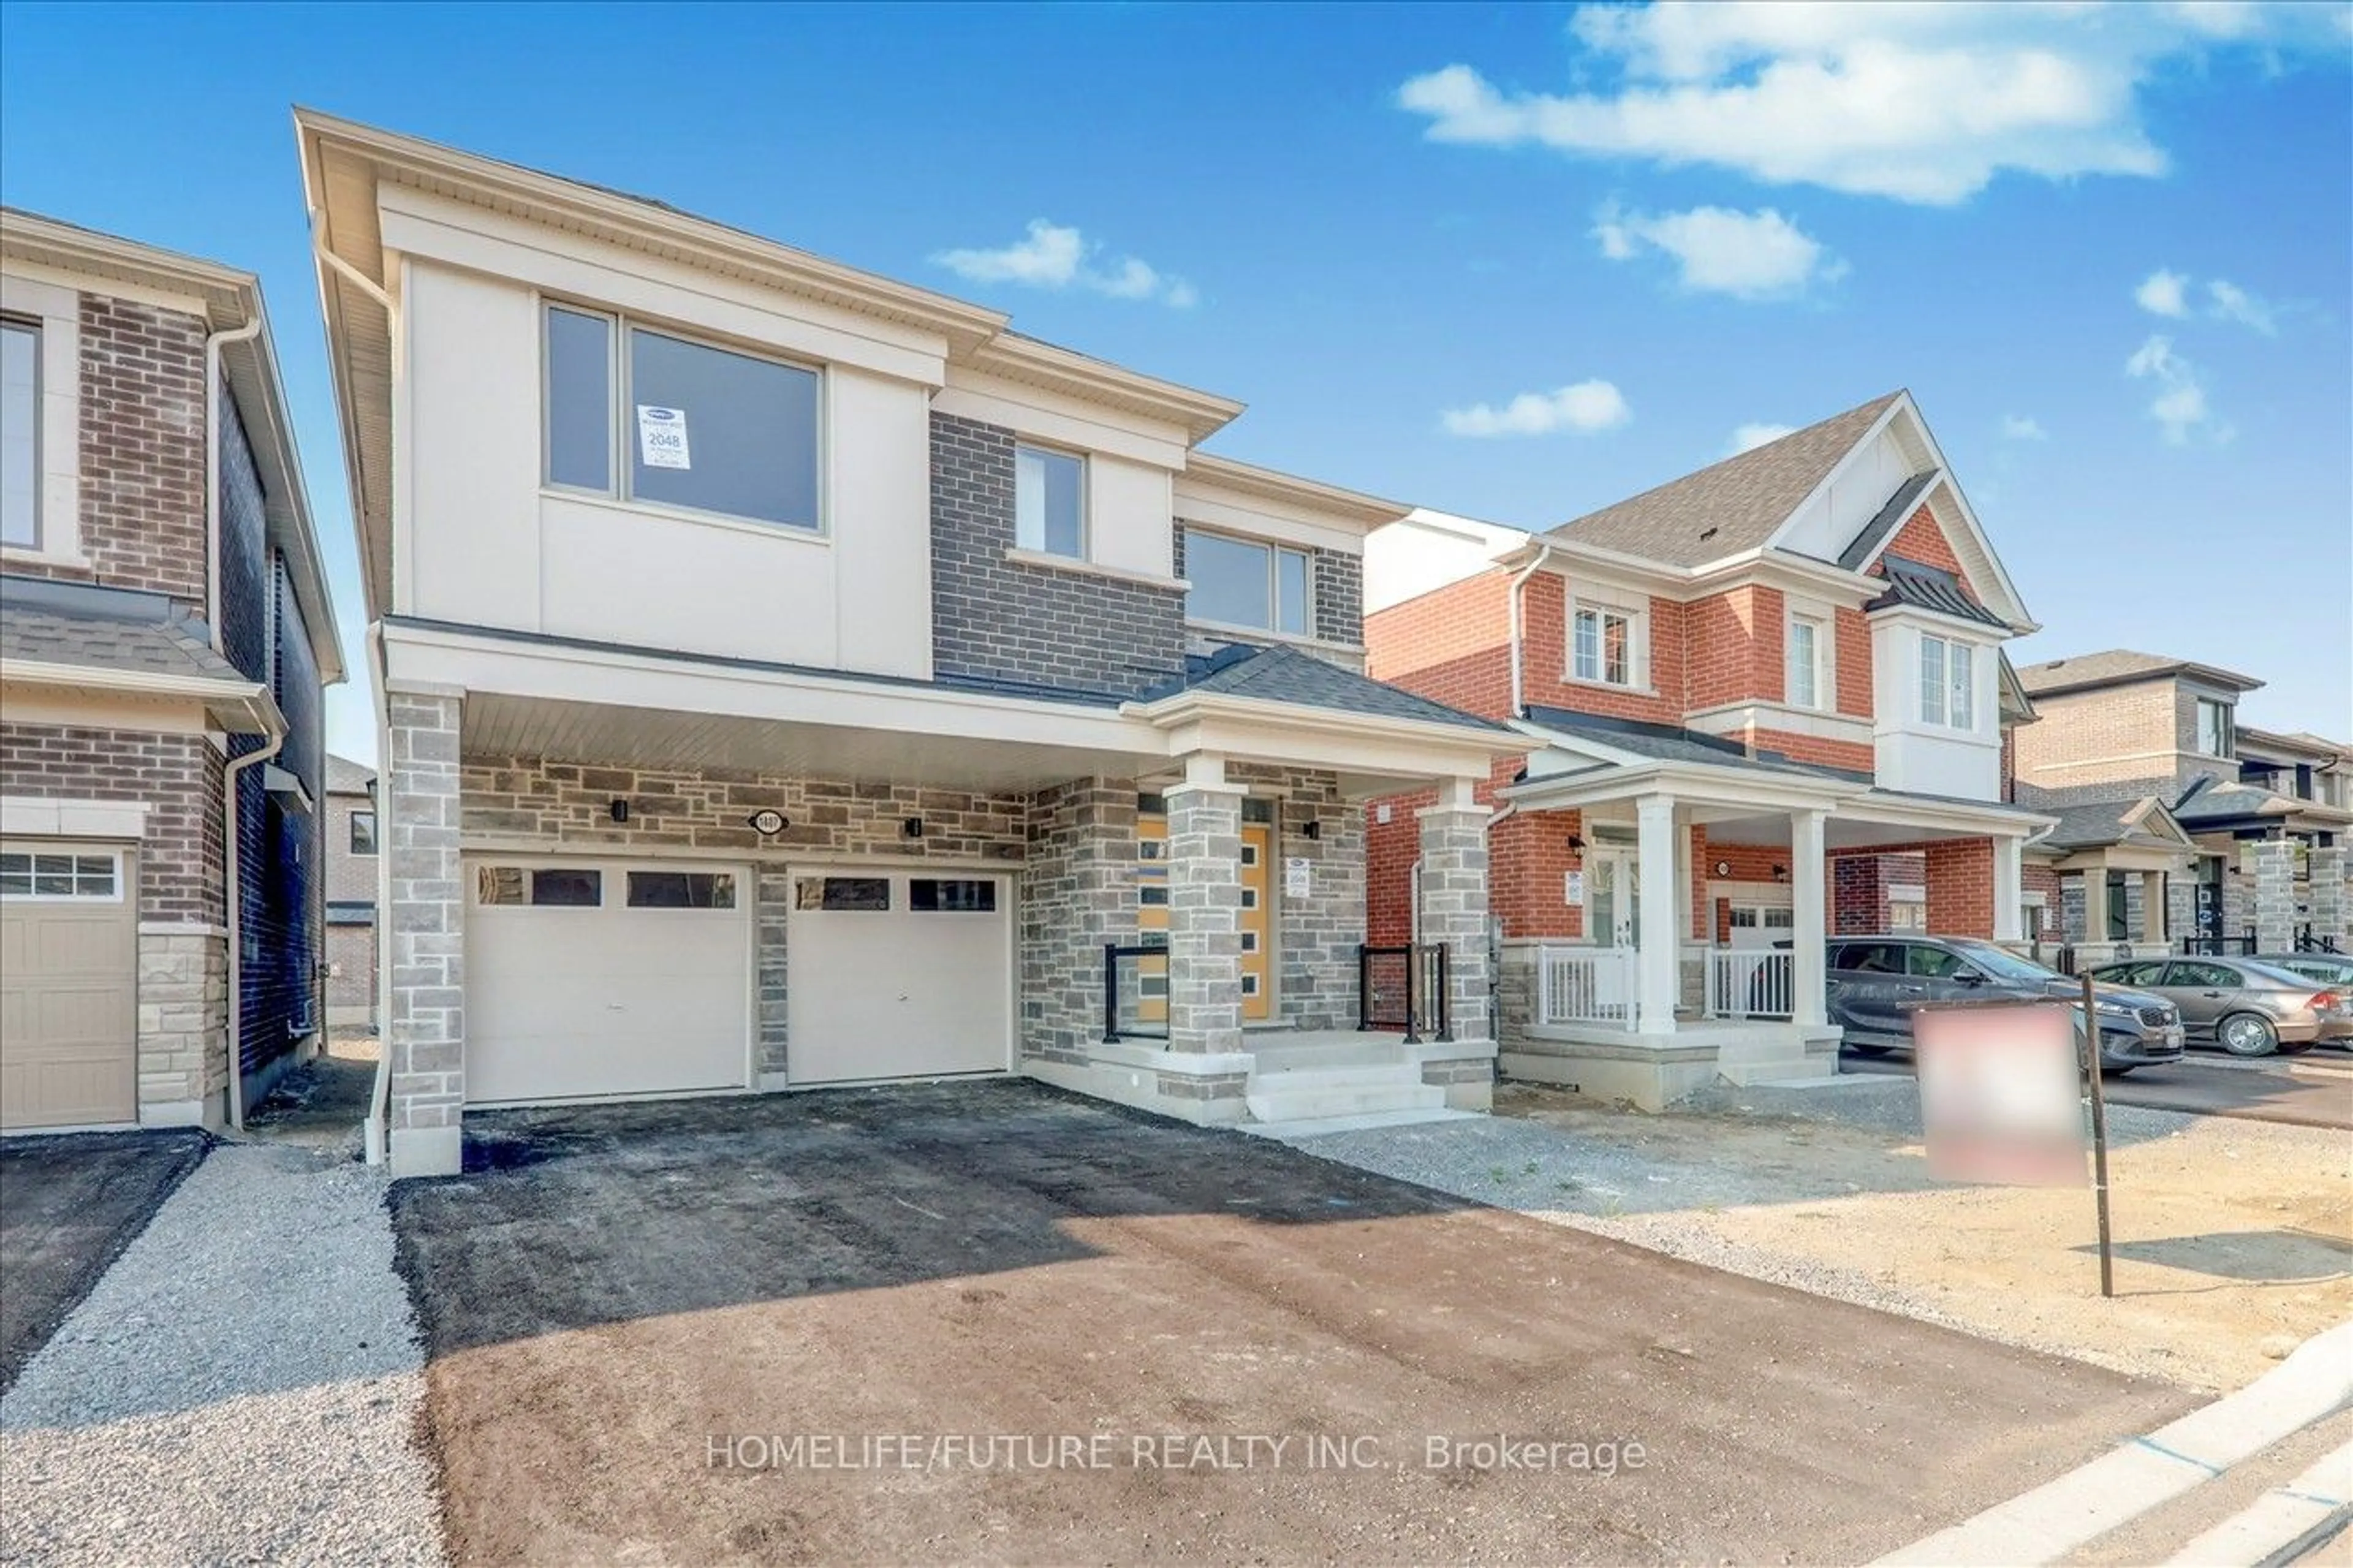 Home with brick exterior material for 1407 Mockingbird Sq, Pickering Ontario L1X 0N8